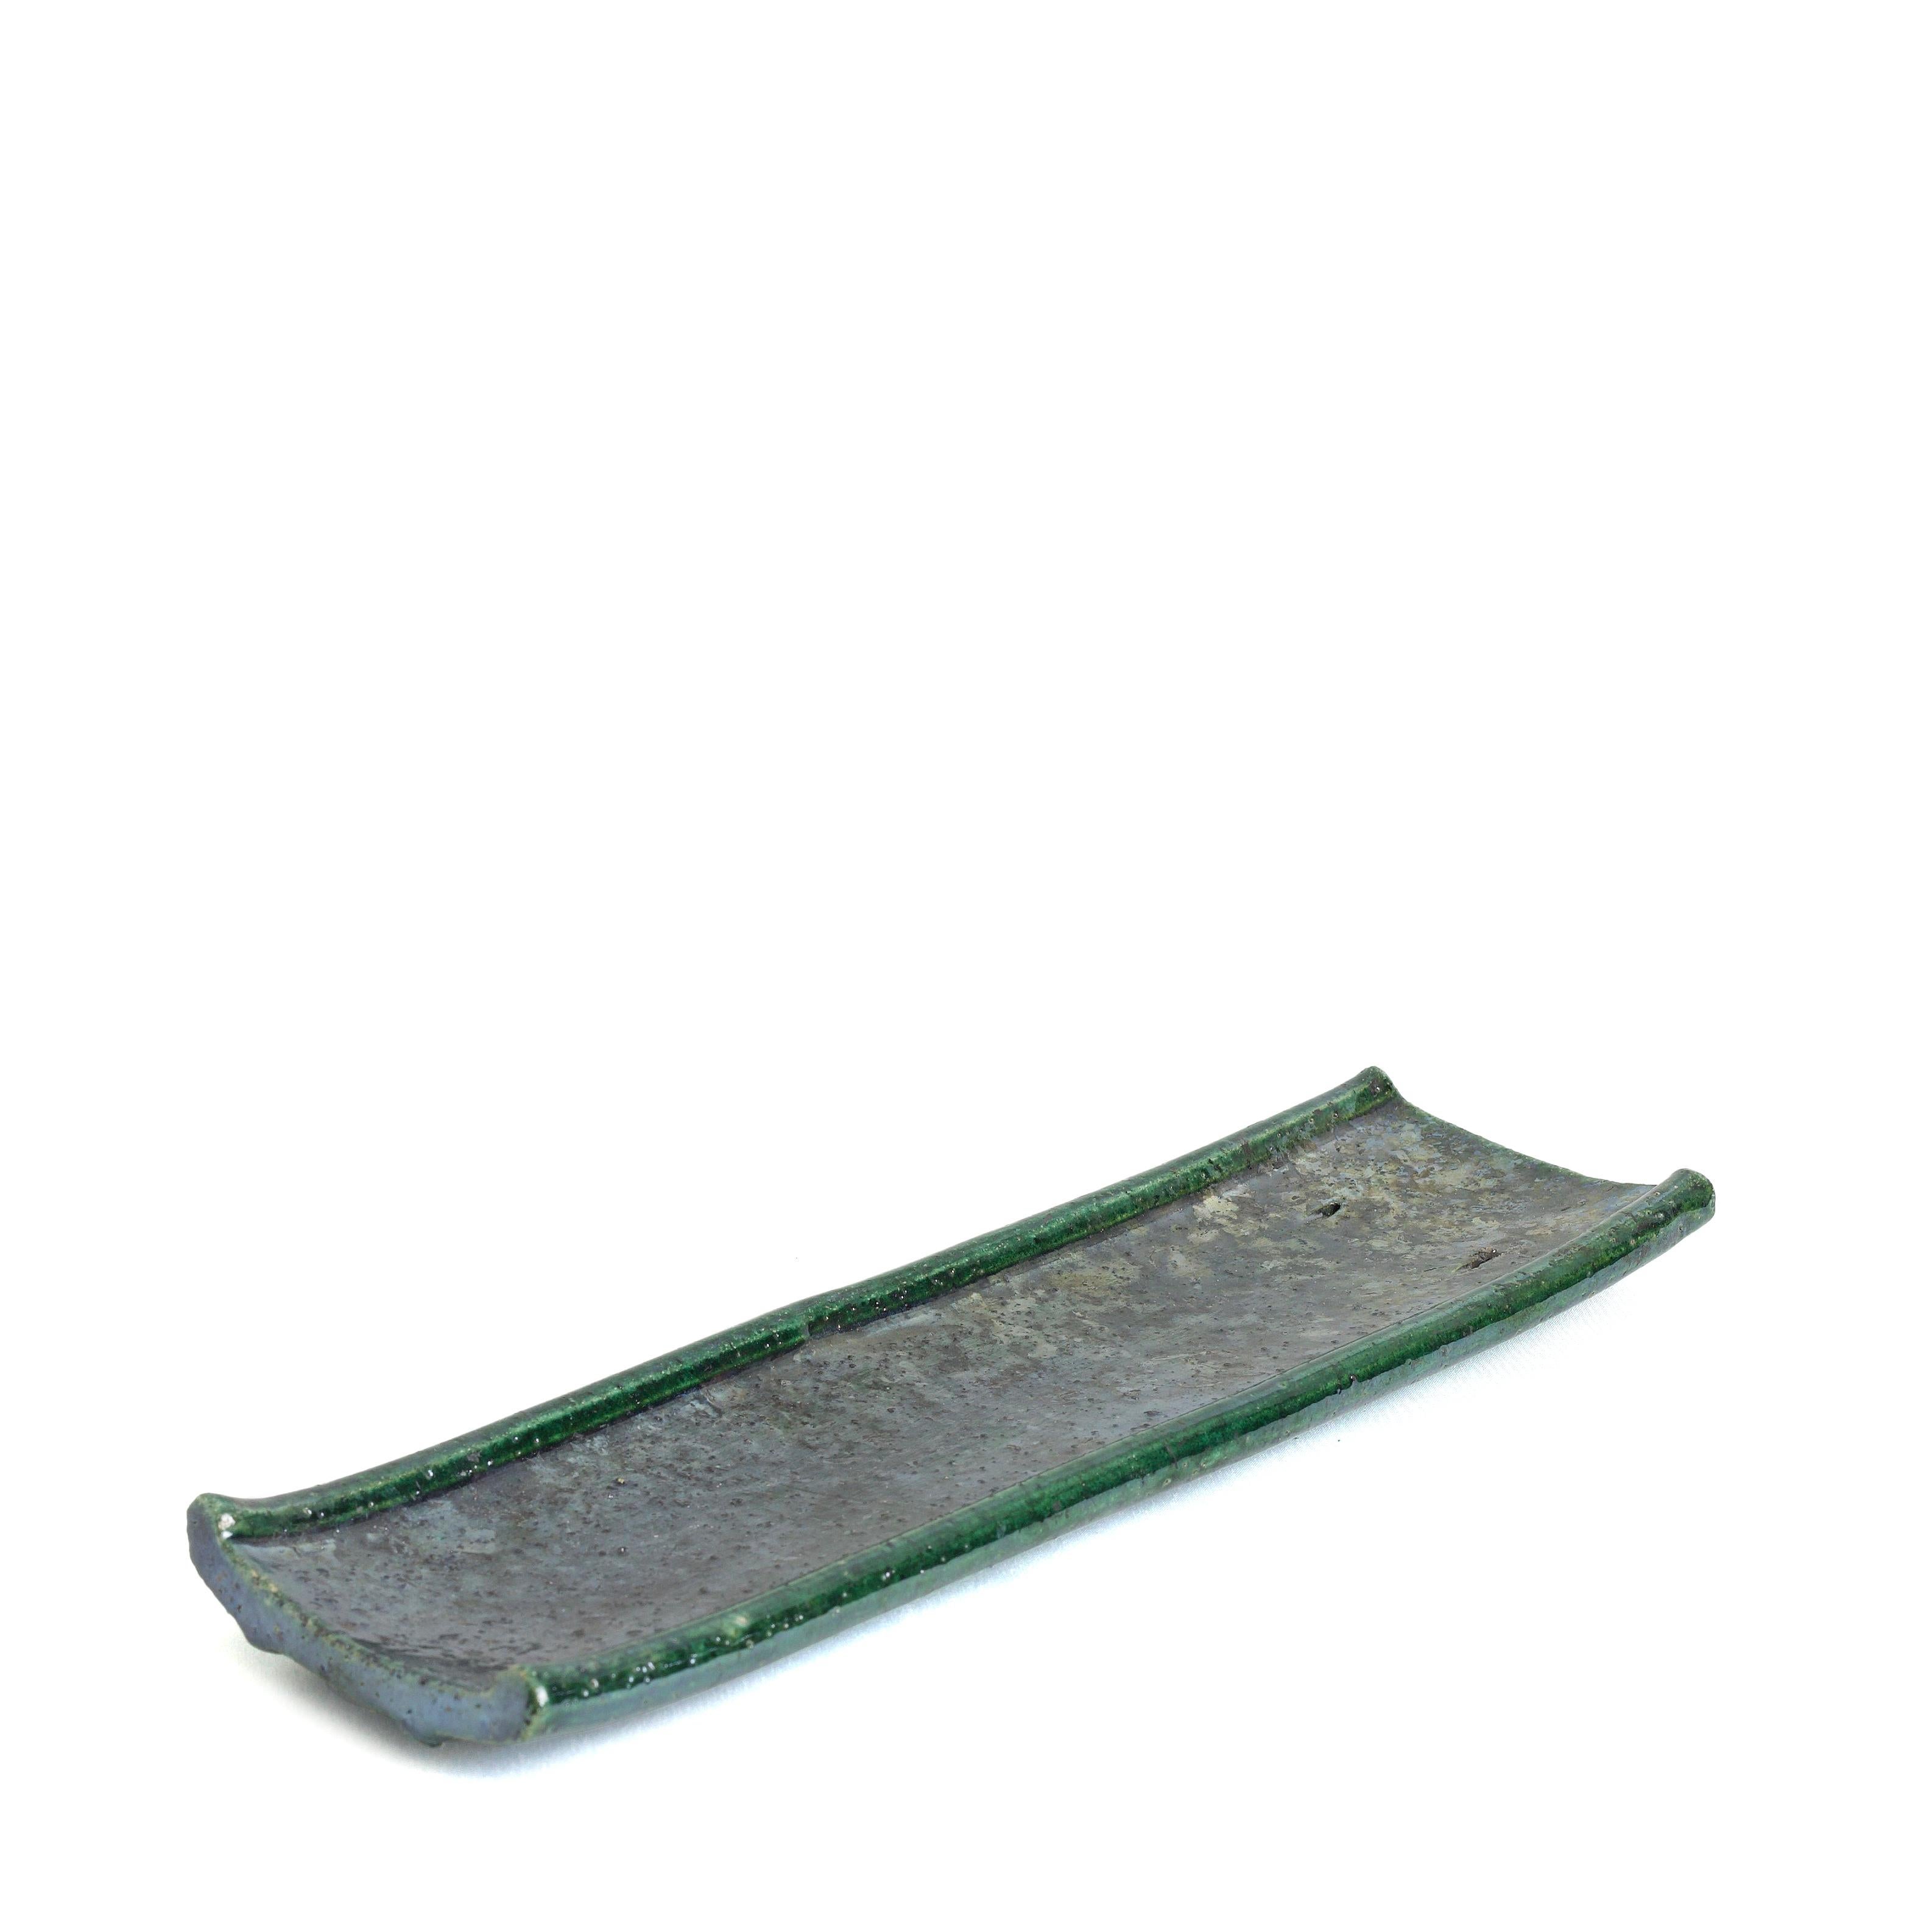 An extraordinary addition to a contemporary decor for a stunning visual allure, this incense holder features a raw, porous shape deftly handcrafted and fire with the Raku Japanese technique. This piece features green copper reflections and a wrought